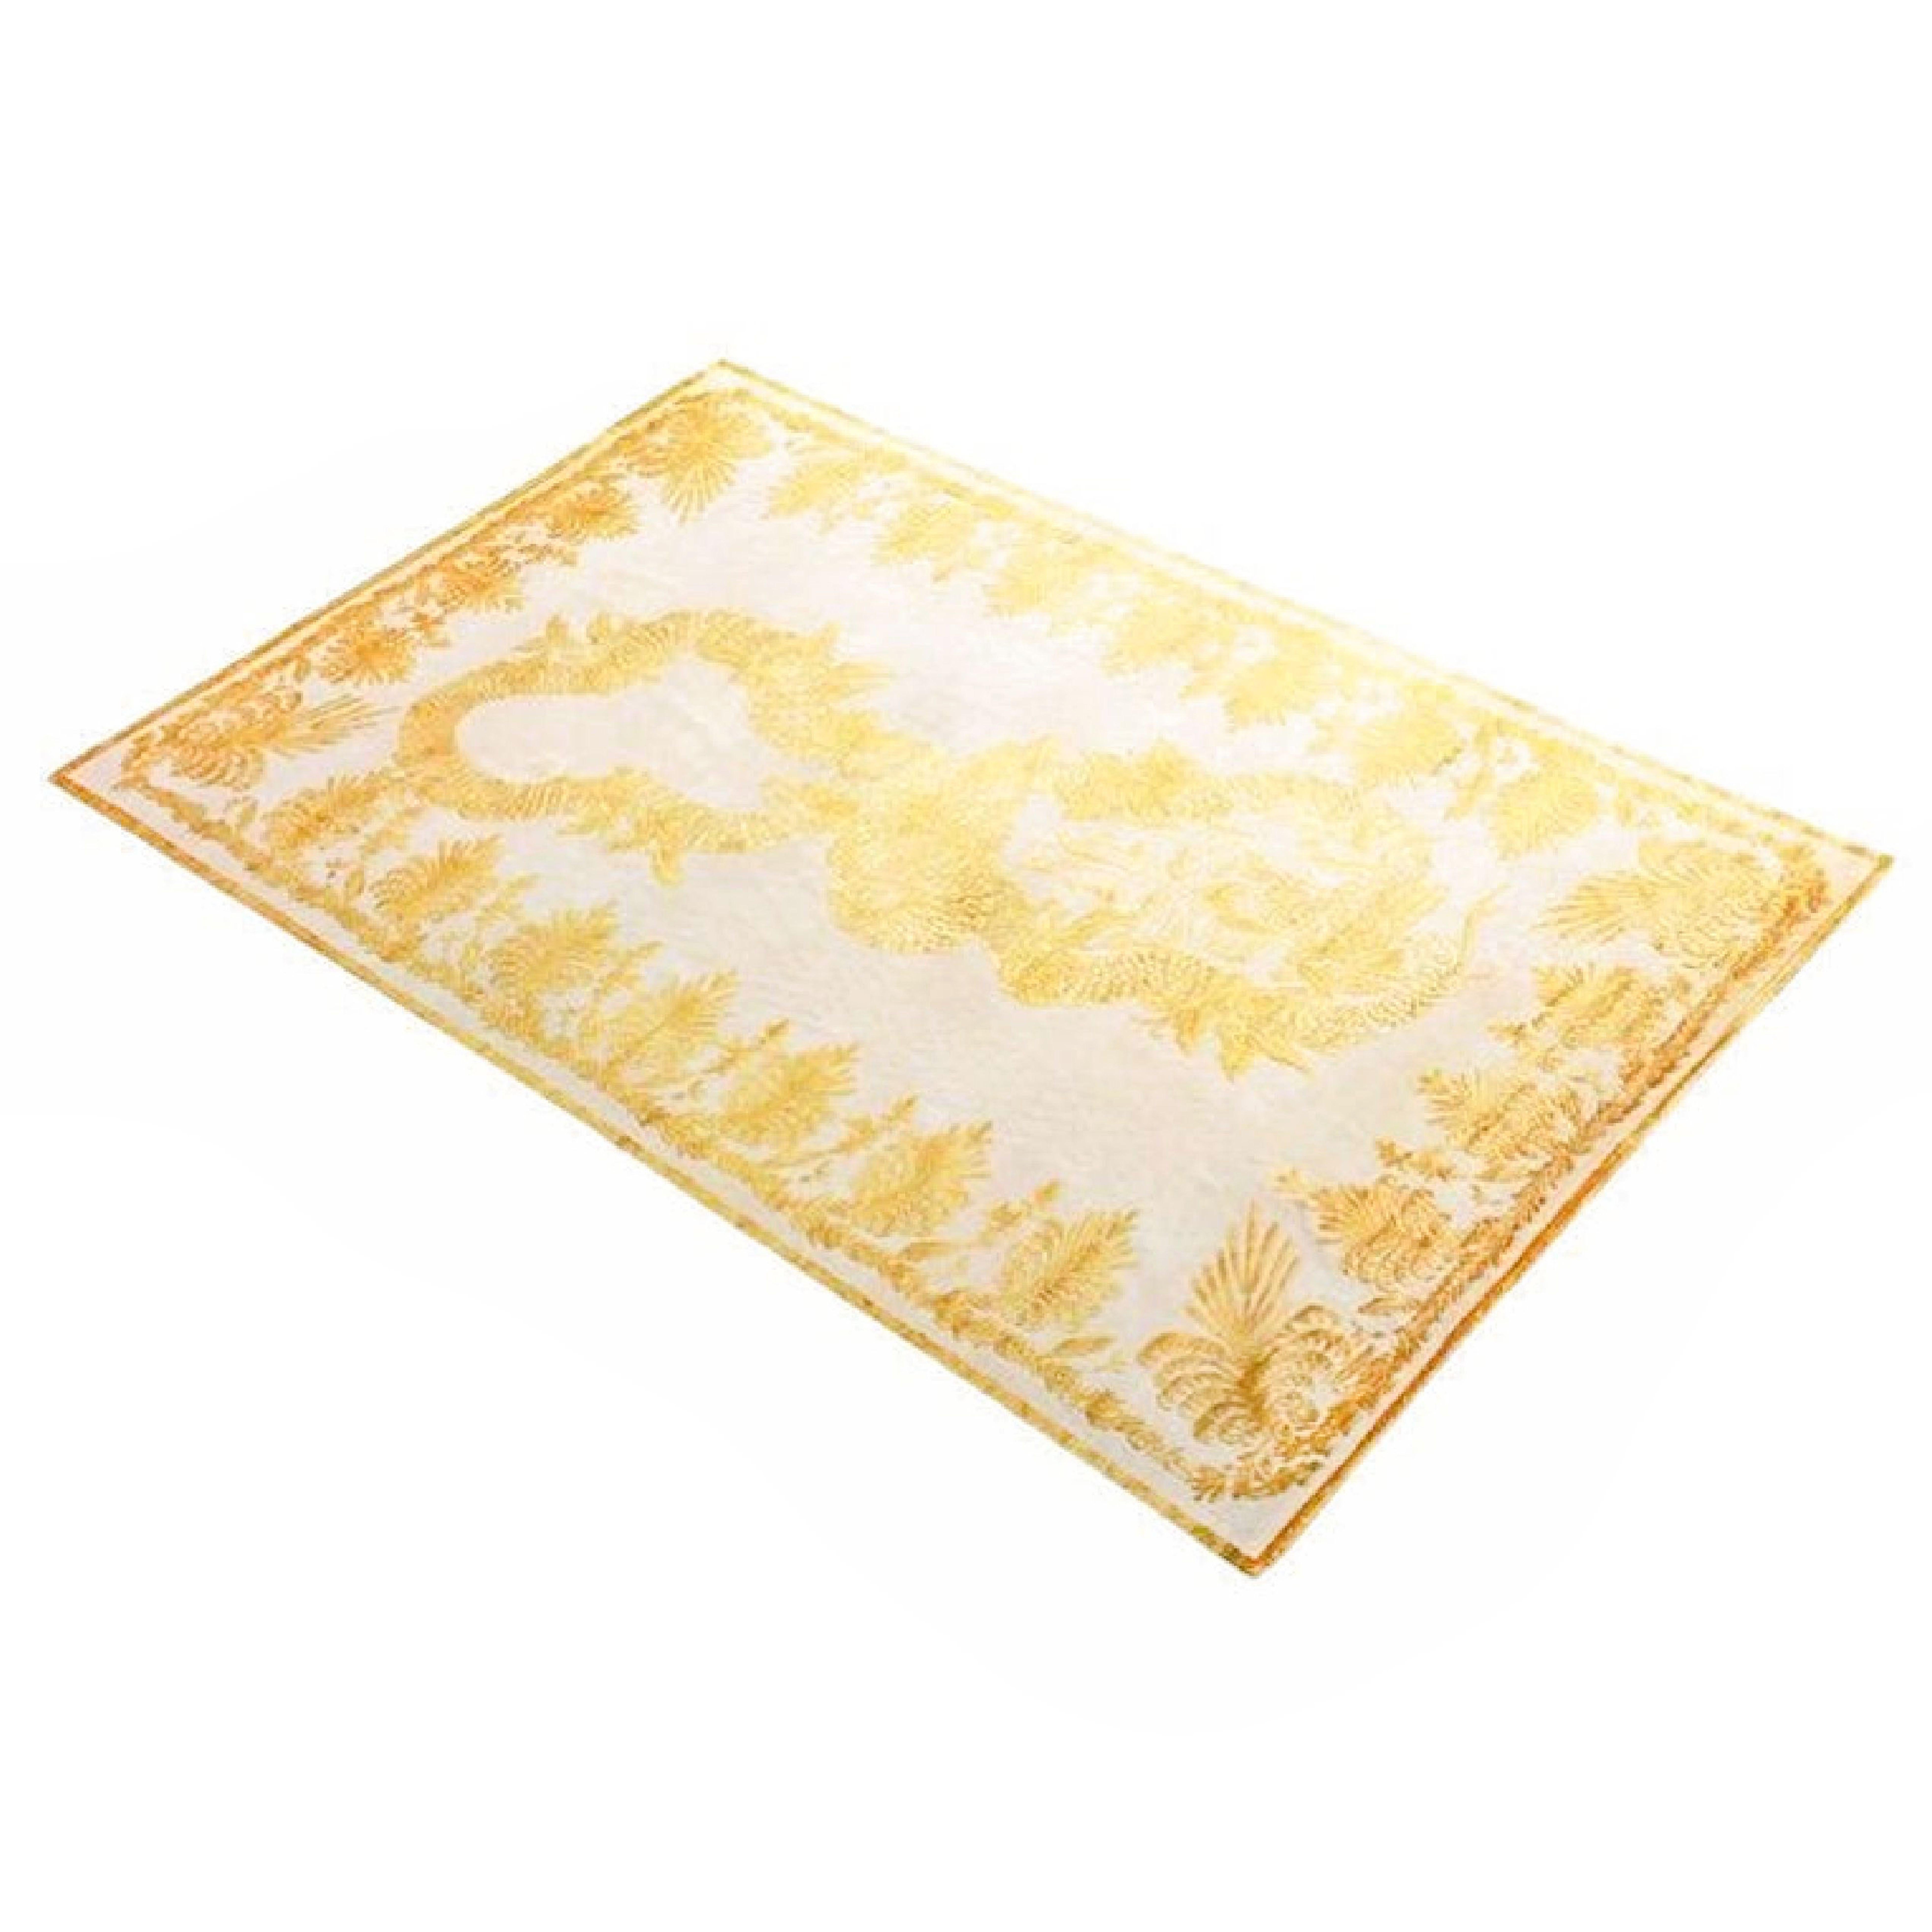 Alexander McQueen Military Brocade Palatial Silk on Wool Hand-Knotted Rug, 2012 For Sale